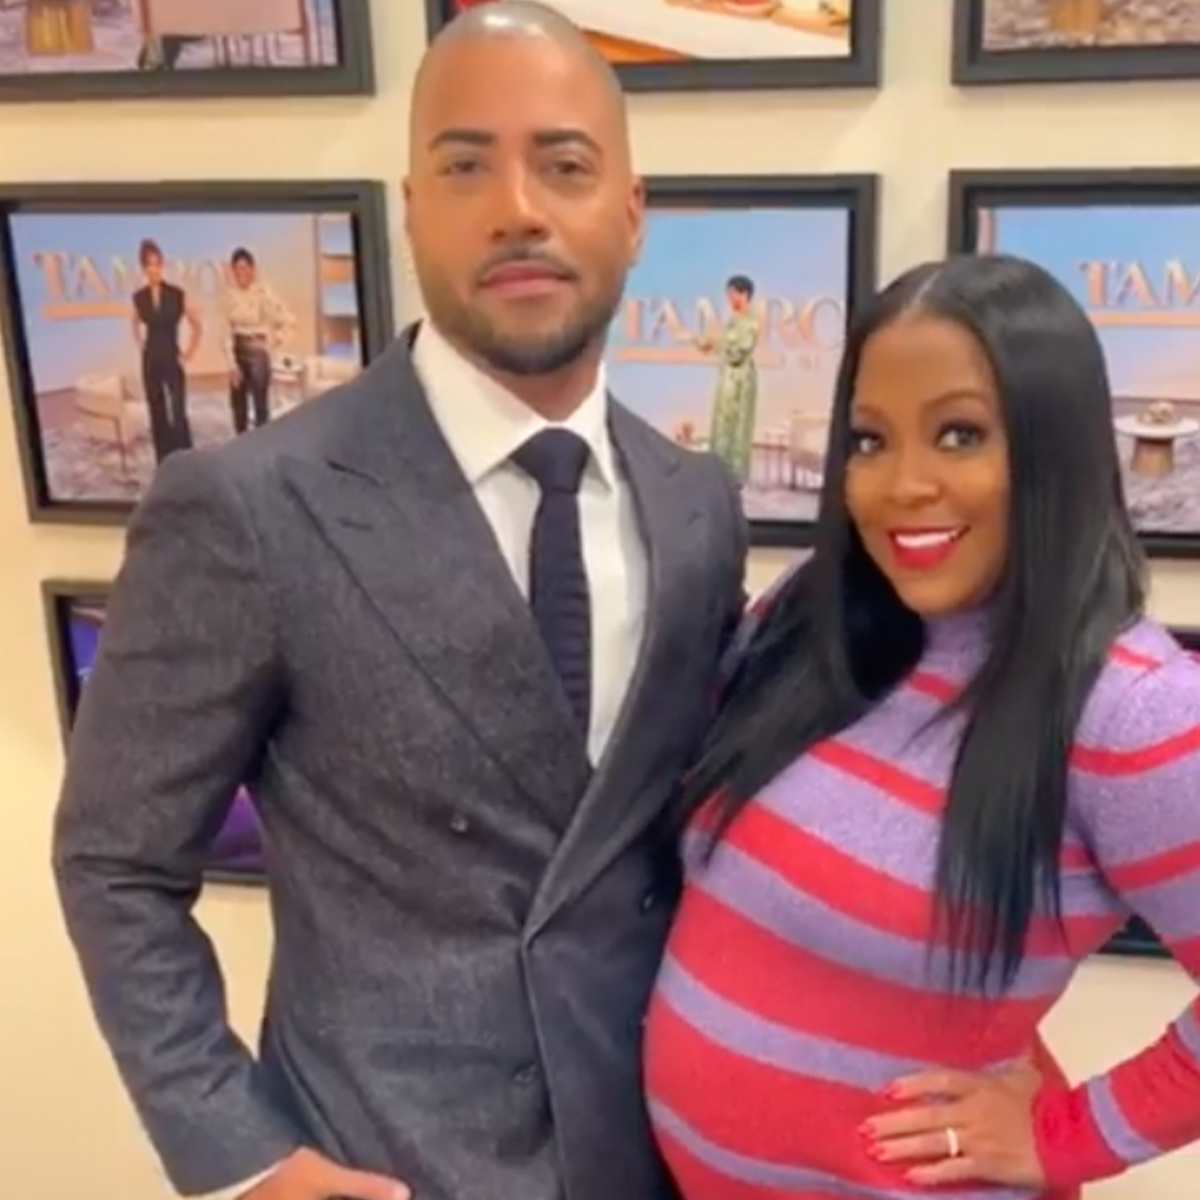 The Cosby Show’s Keshia Knight Pulliam Is Pregnant, Expecting First Baby With Brad James – E! Online